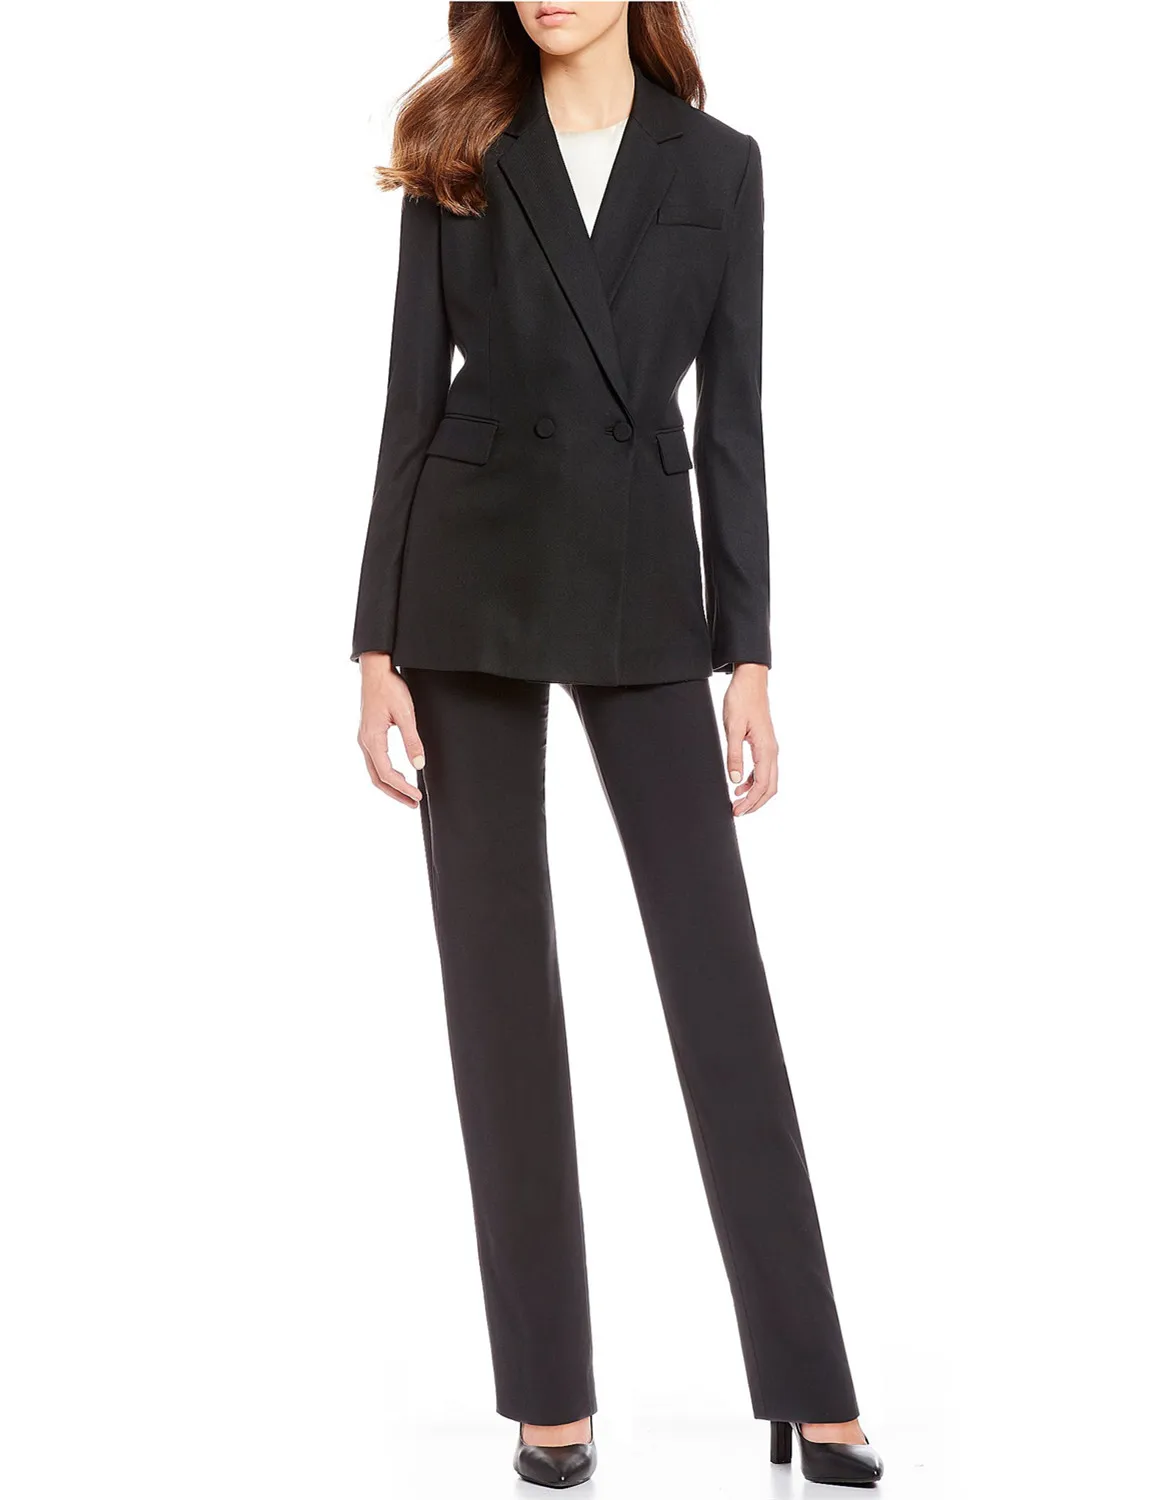 Women's 2 Piece Suits Set for Business Lady Blazer Jacket and Pants